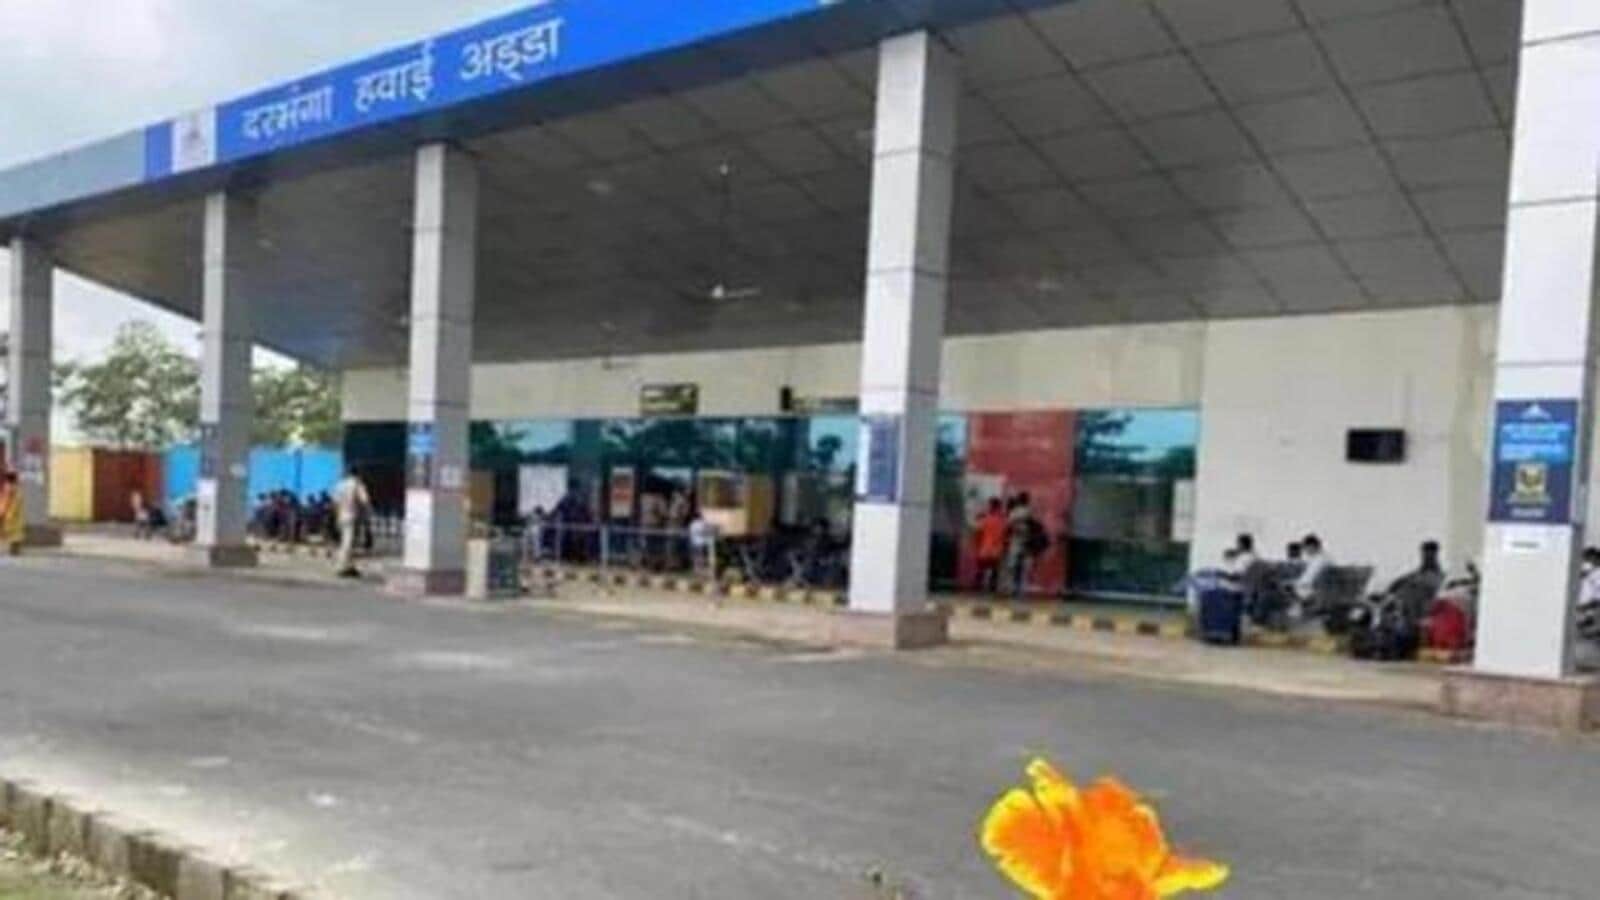 govt-acquires-24-acres-for-bihar-s-darbhanga-airport-runway-expansion-official